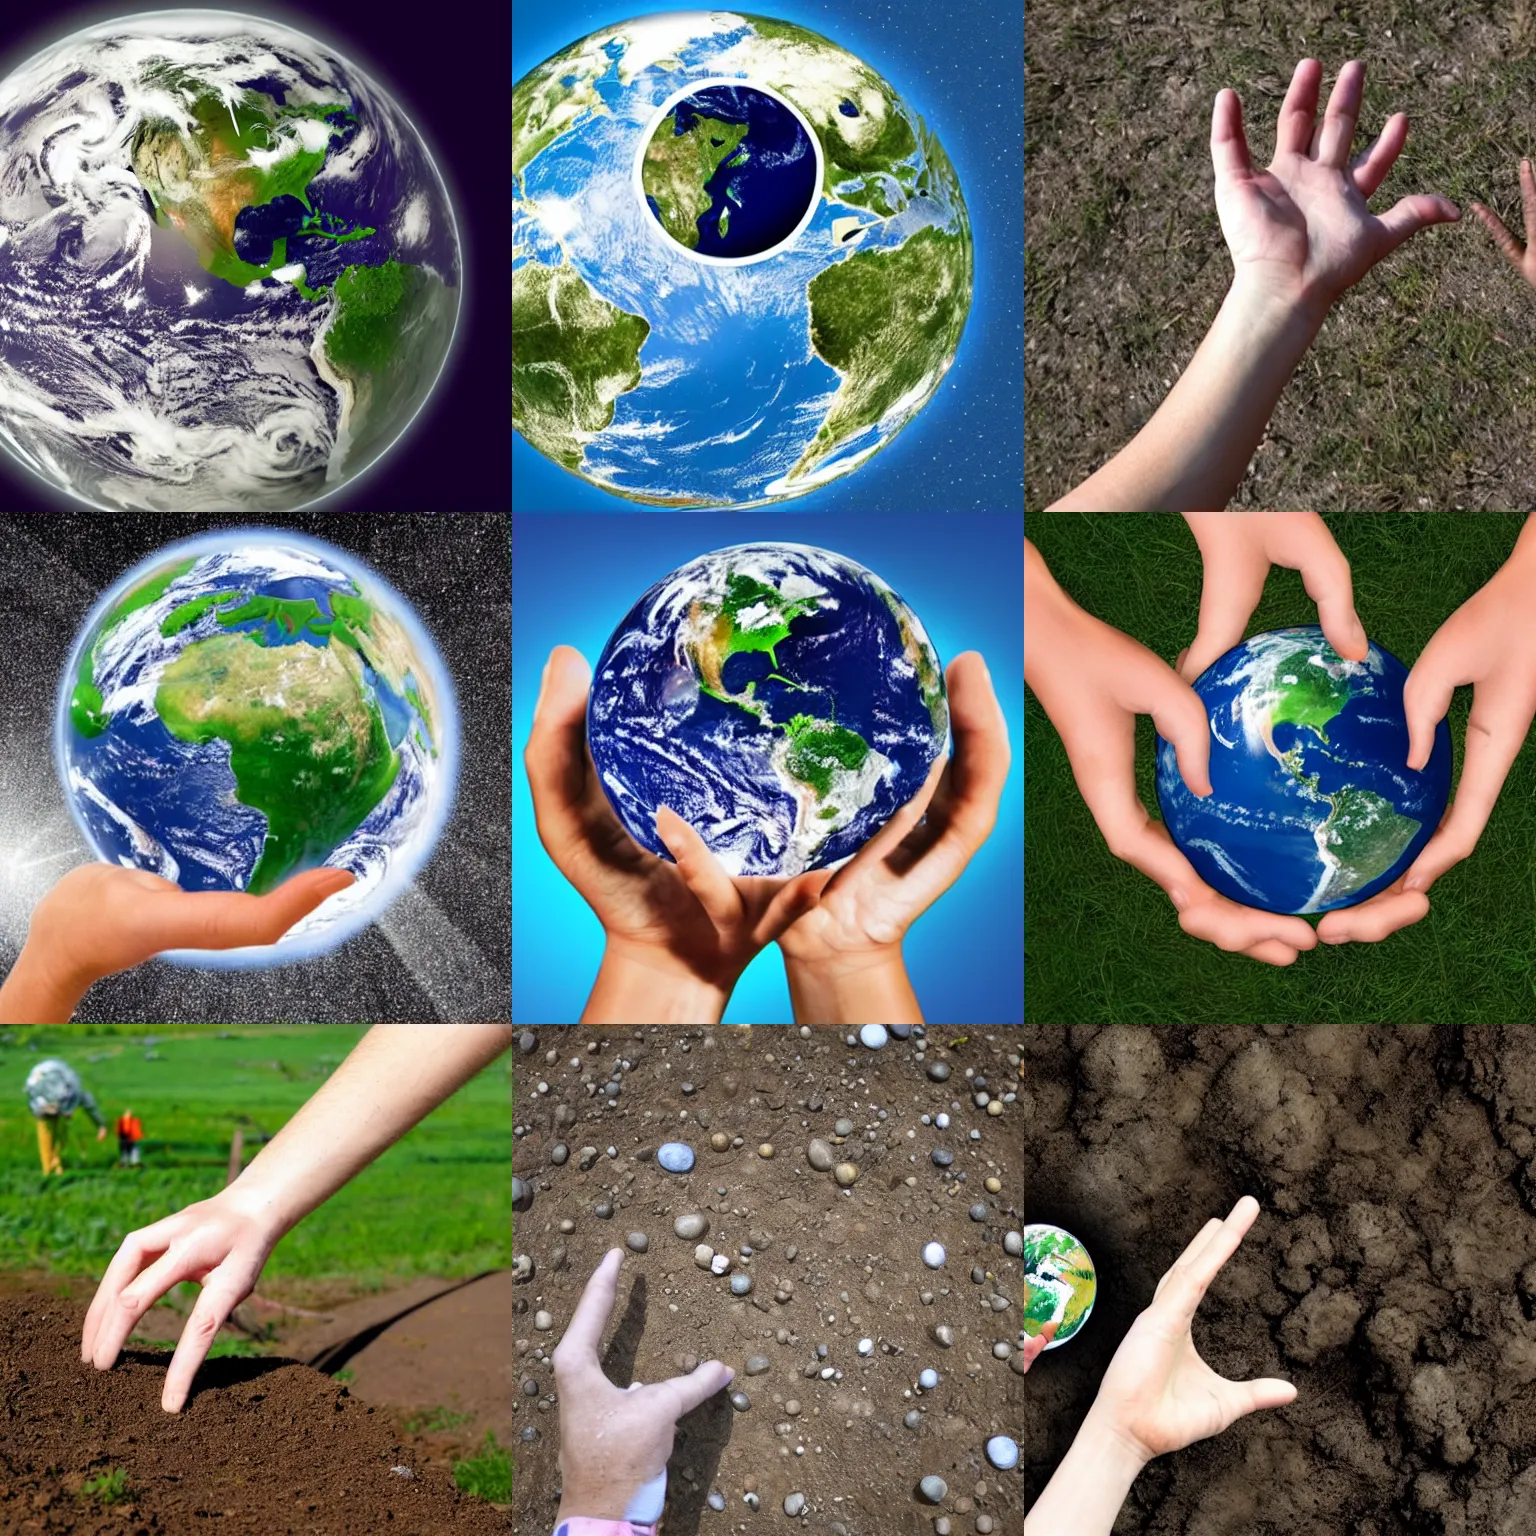 Prompt: a hand reaches out to pick up the planet earth